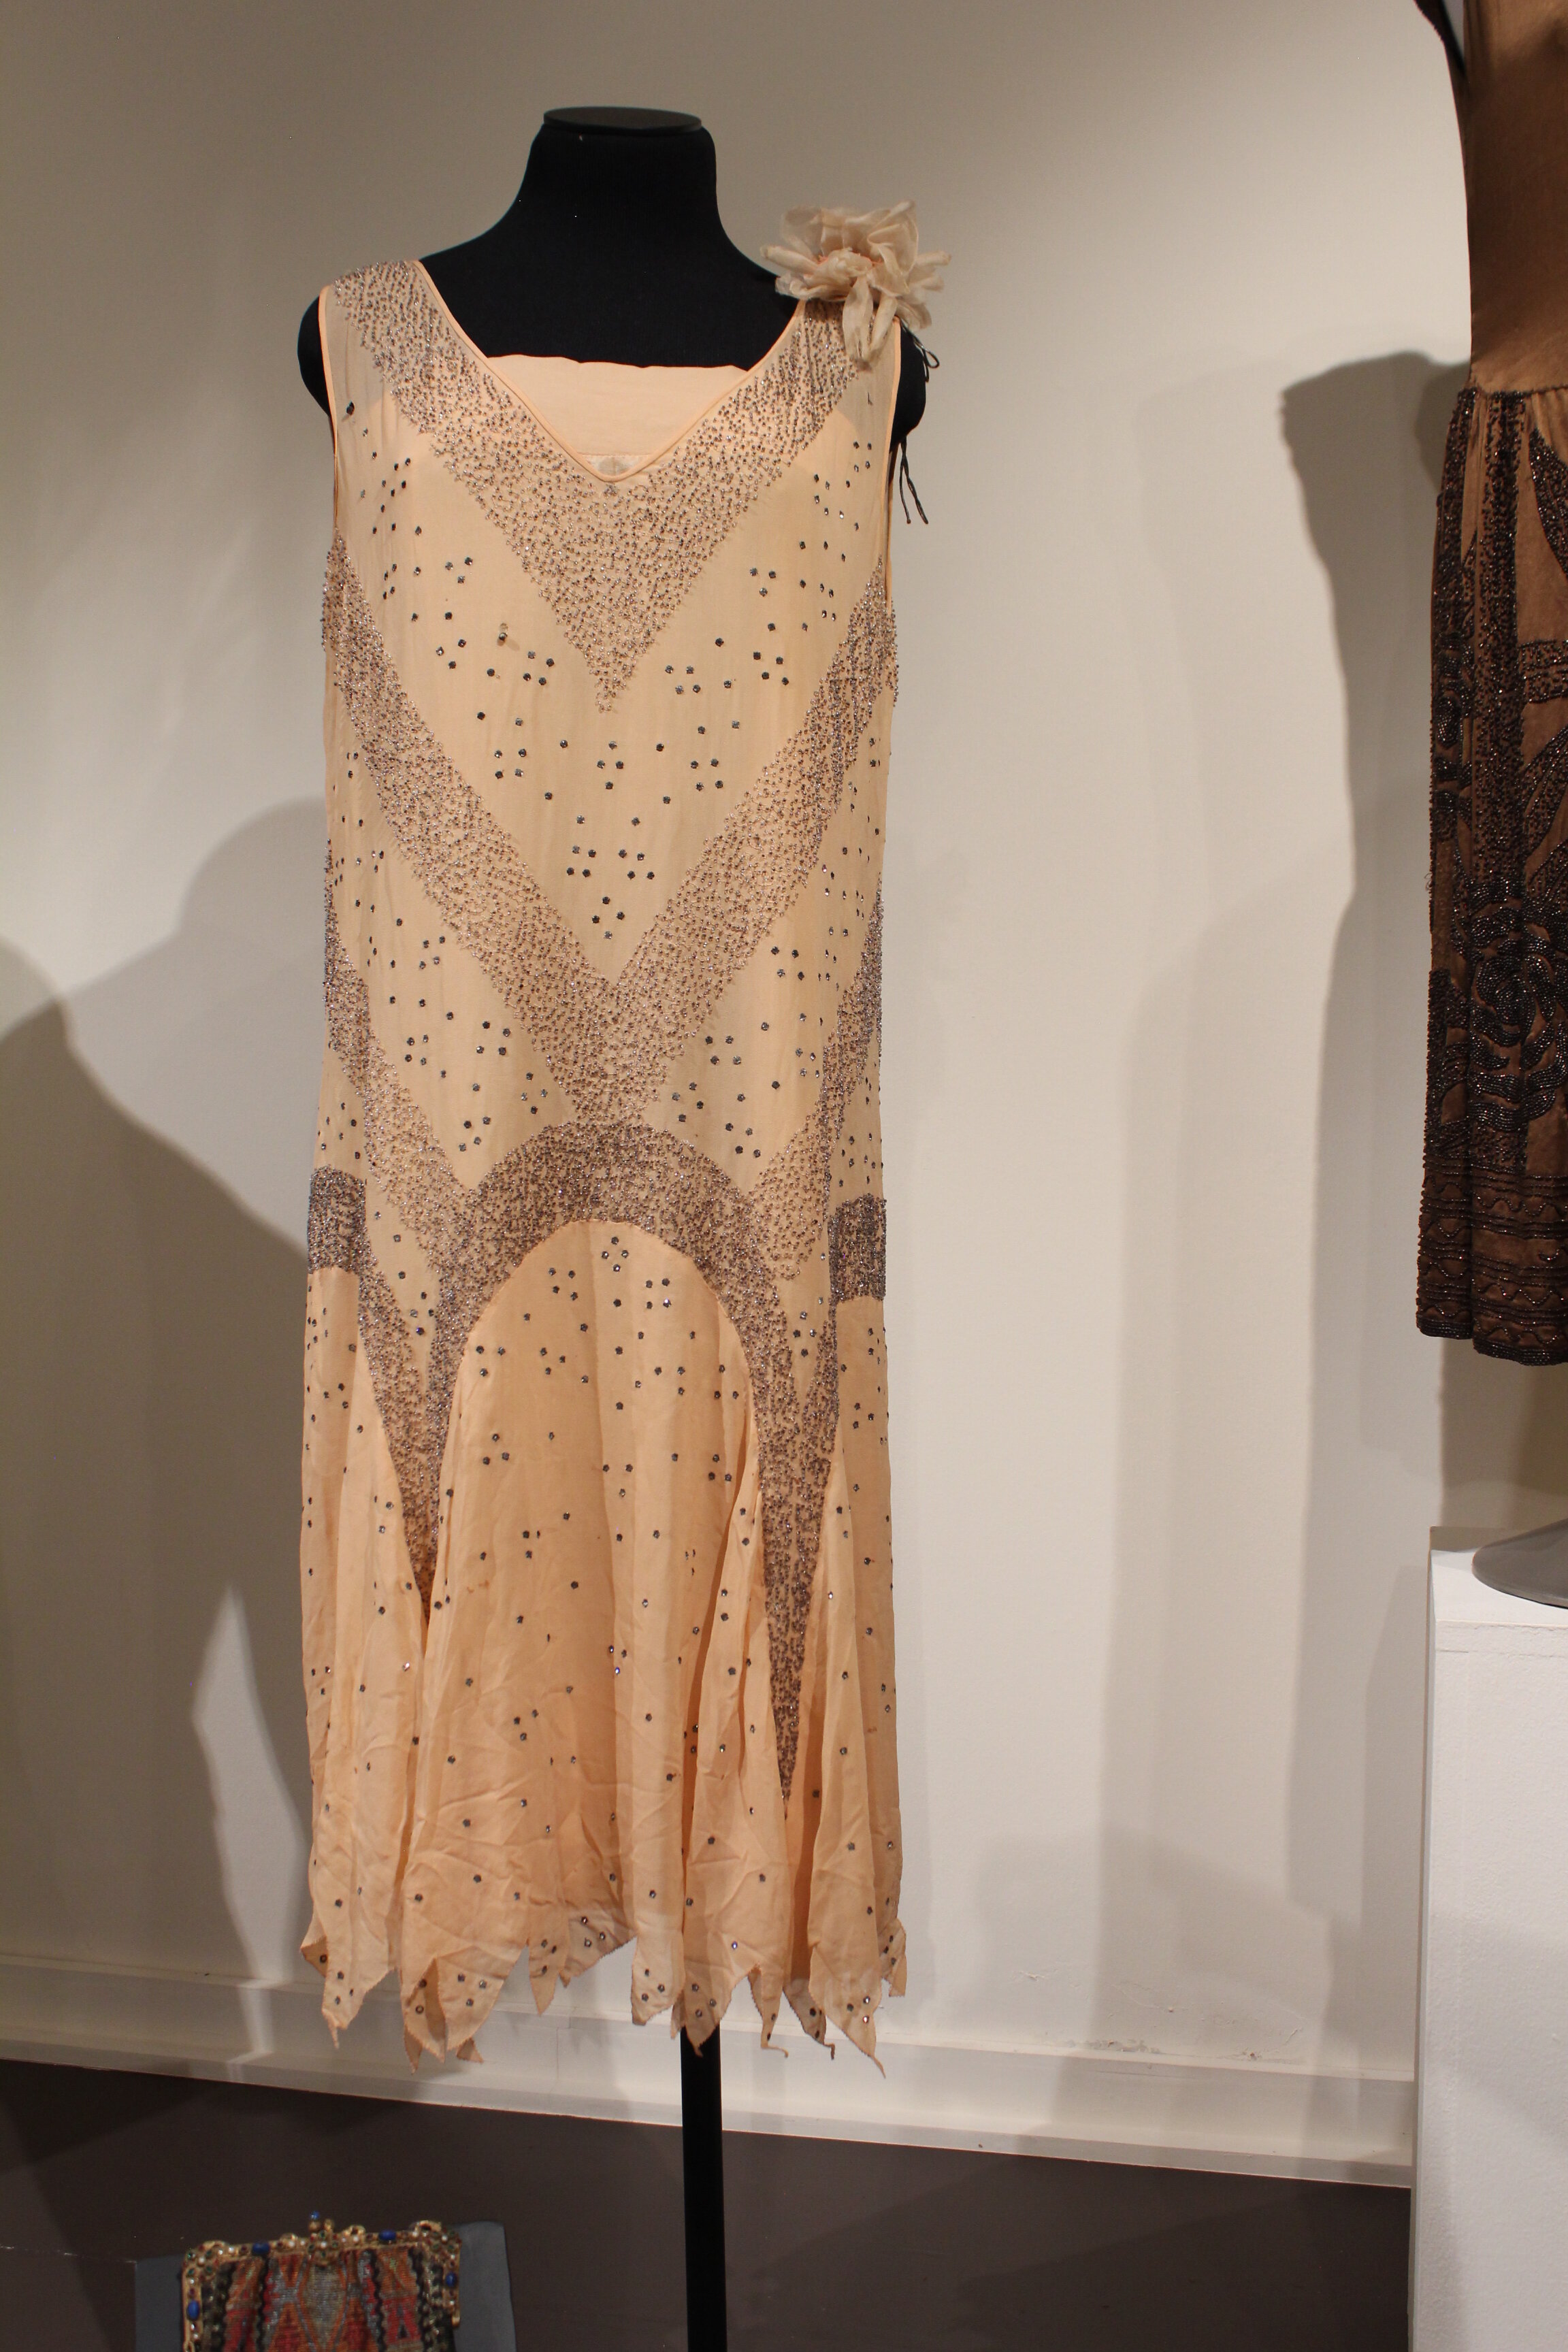 Dress, 1926, silk, diamond sequinsThis peach dress was worn to the Daniel J. Moody, Jr. and Mildred Paxton wedding on April 20, 1926. The Hardin-Simmons website says that their “twilight wedding was one of Abilene’s grandest occasions.” Mildred, bor…